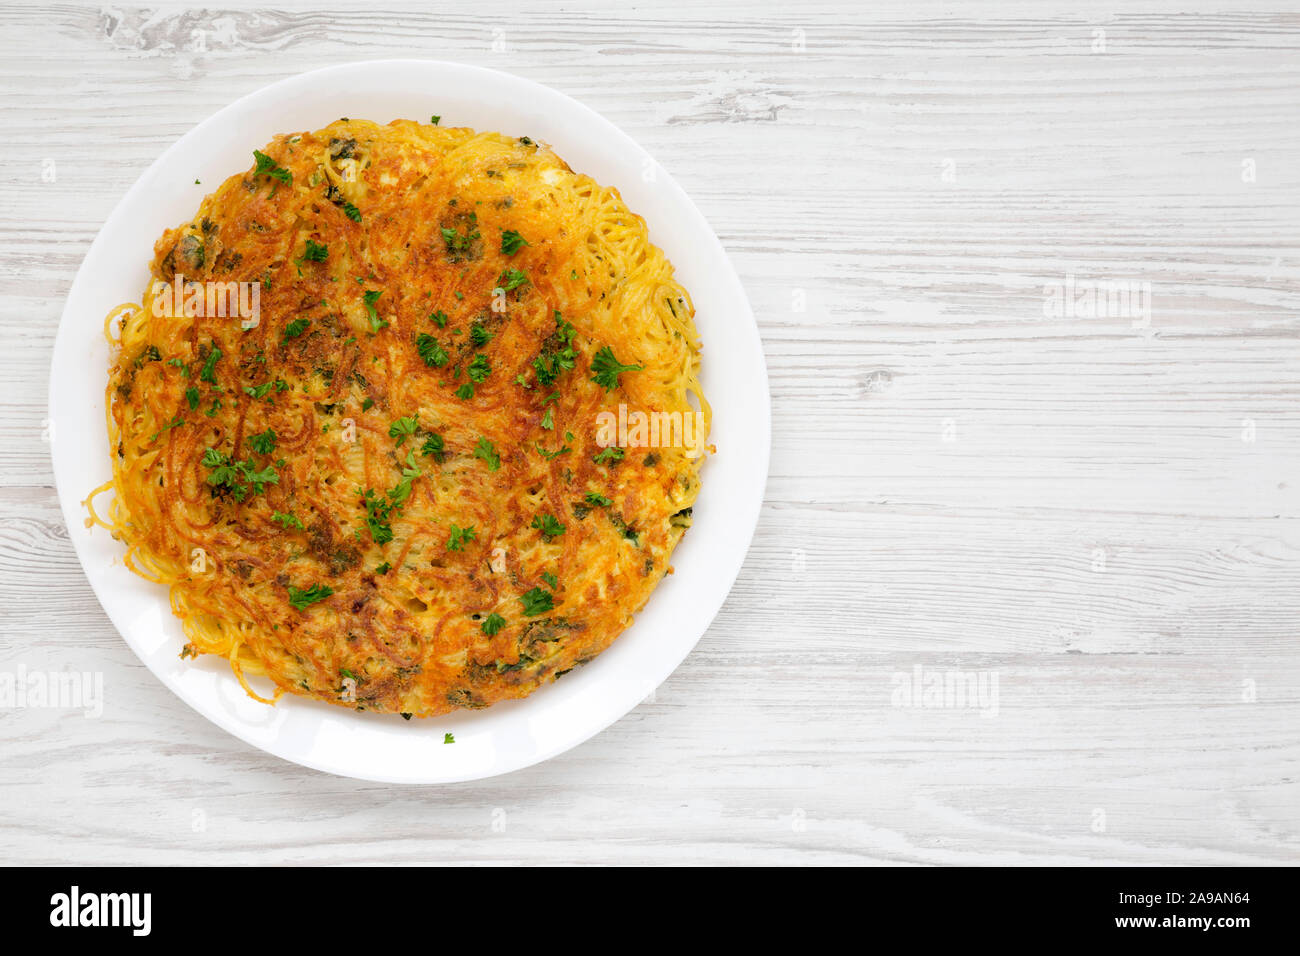 Homemade spaghetti omelette on a white plate over white wooden surface, overhead view. Flat lay, top view, from above. Stock Photo